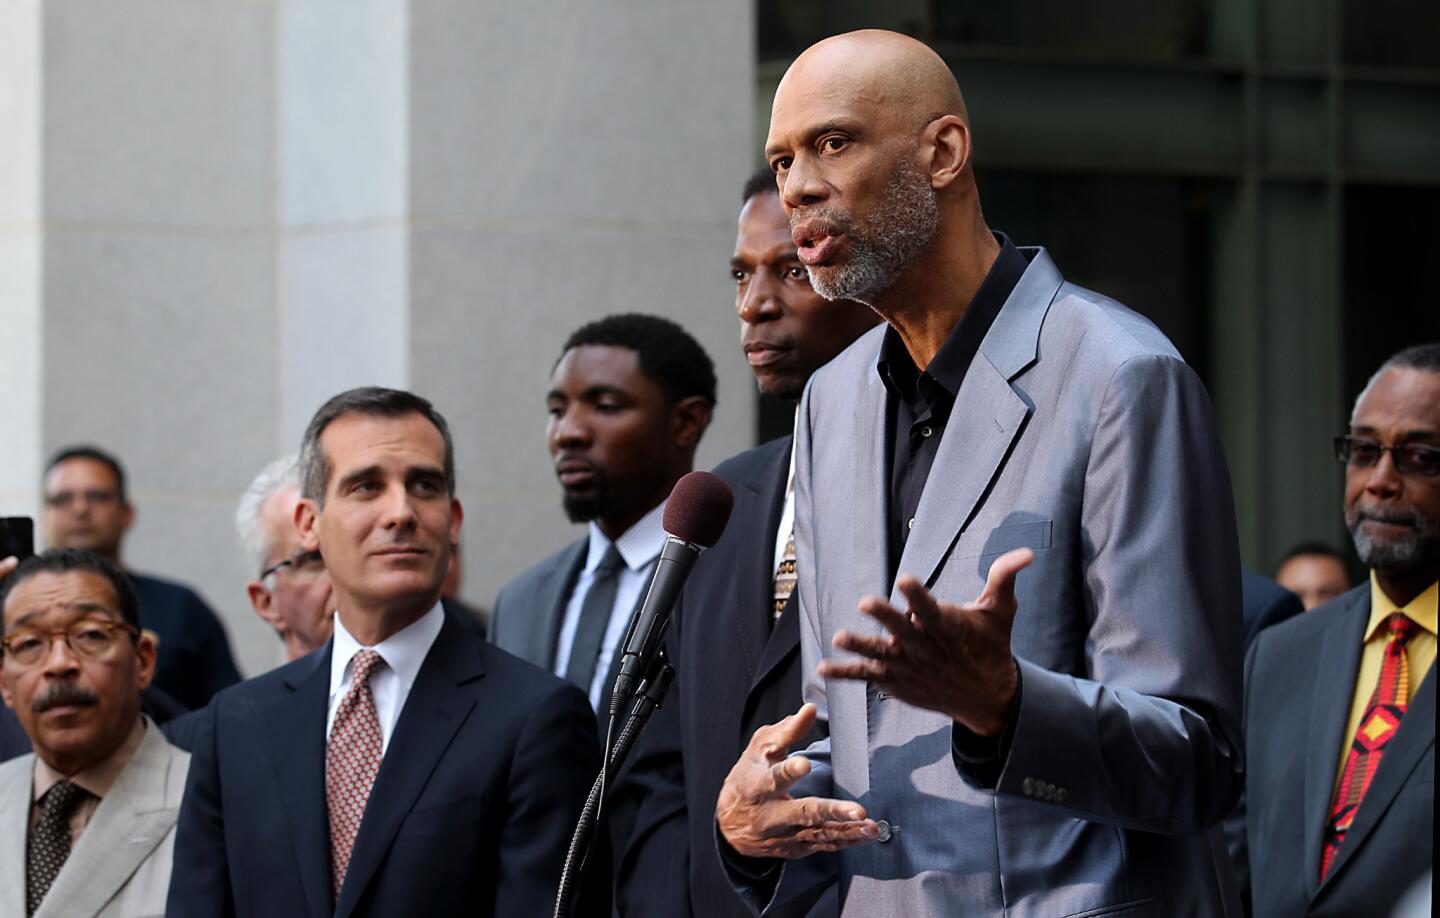 Players and officials react to Donald Sterling